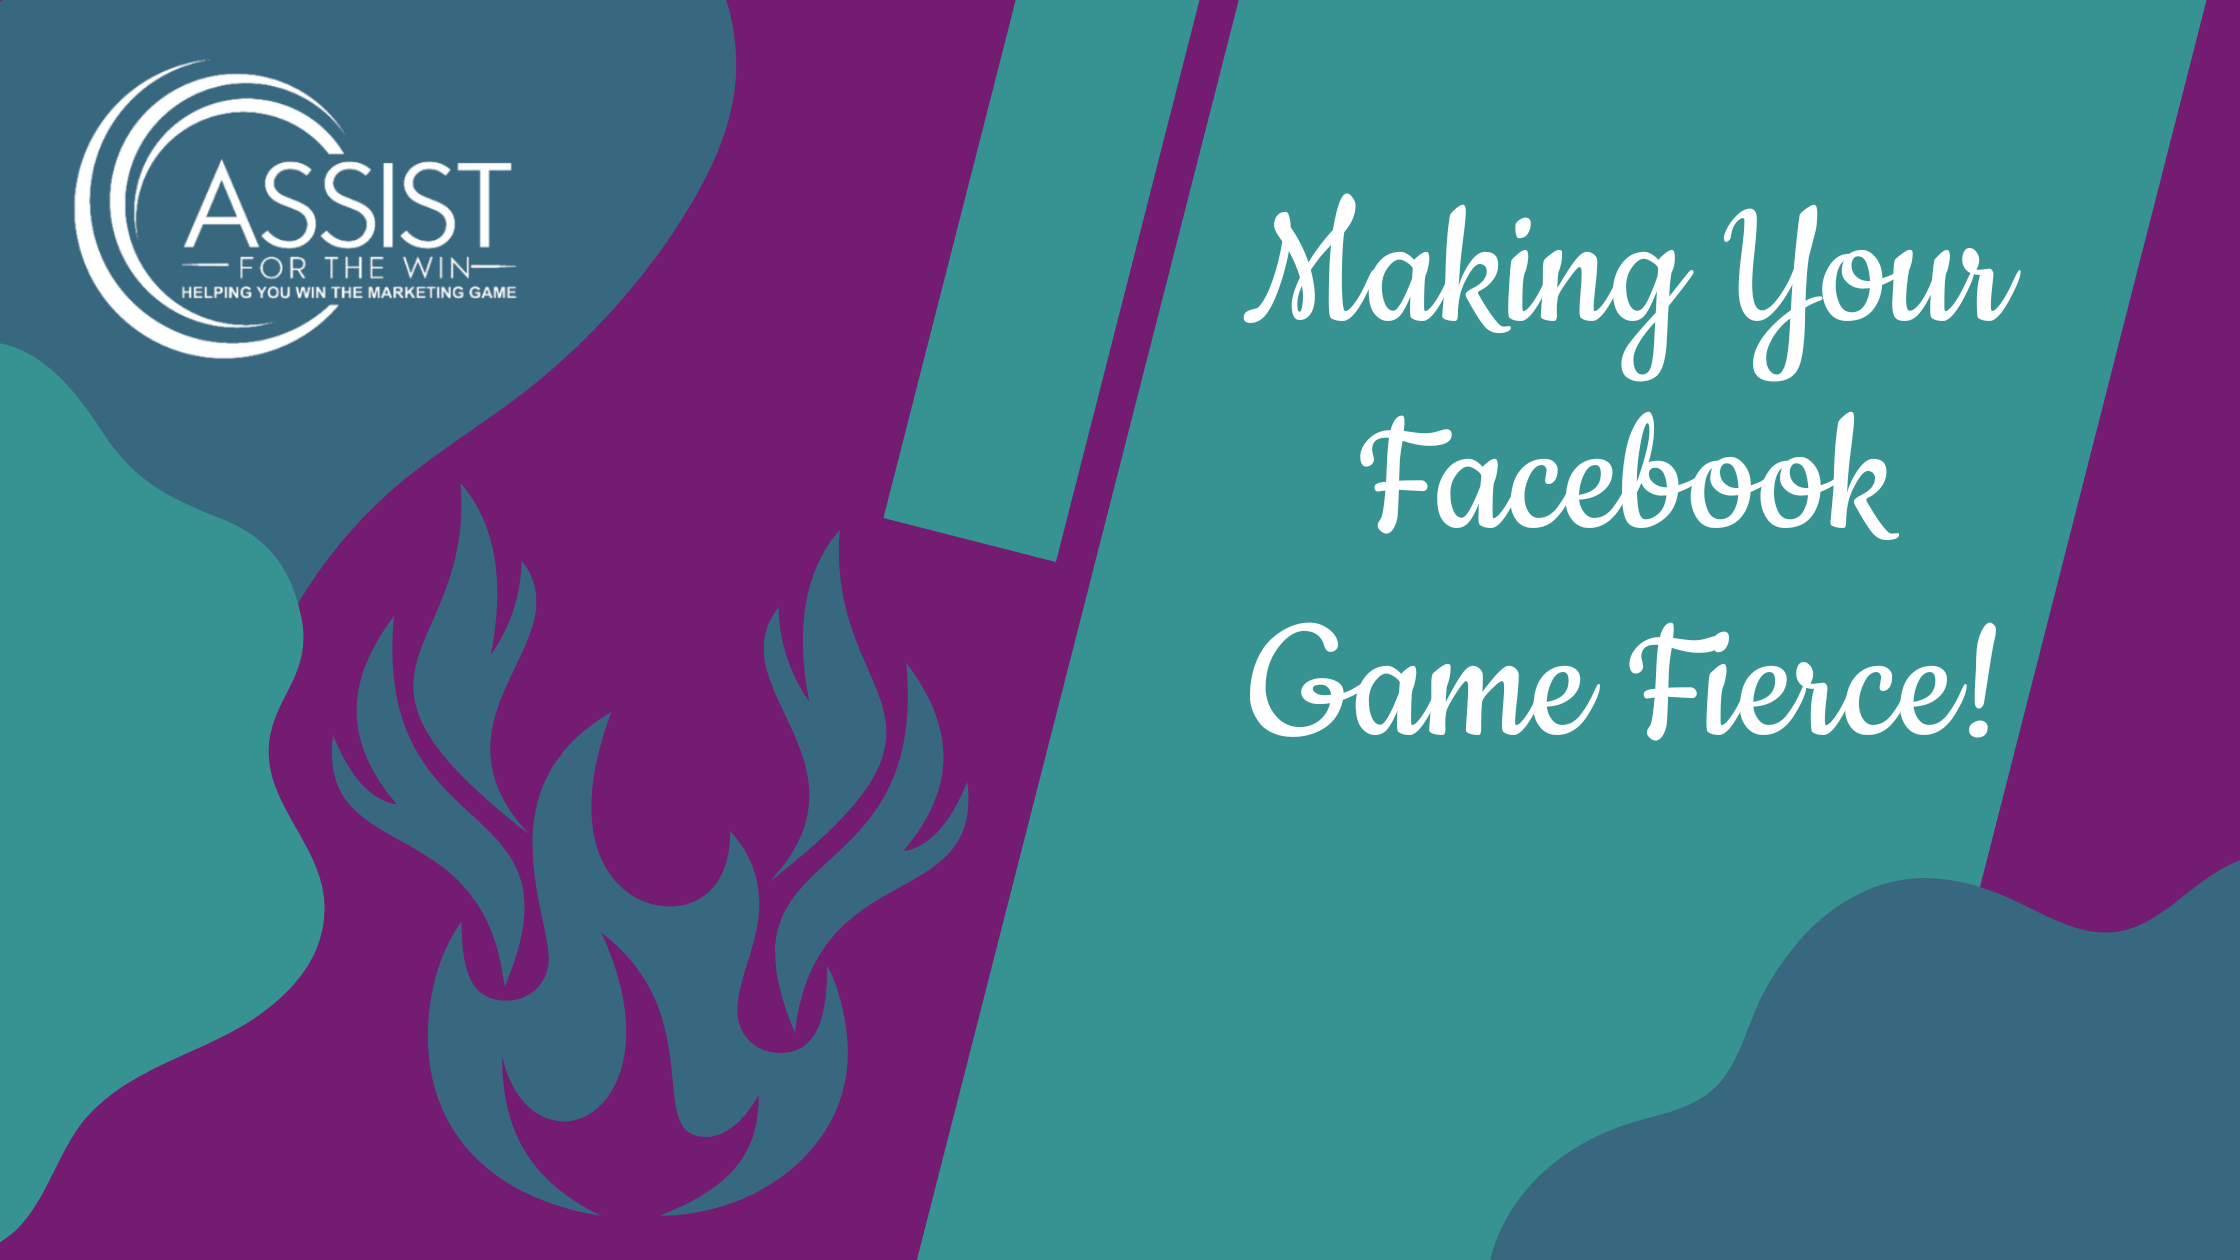 Making Your Facebook Game Fierce!